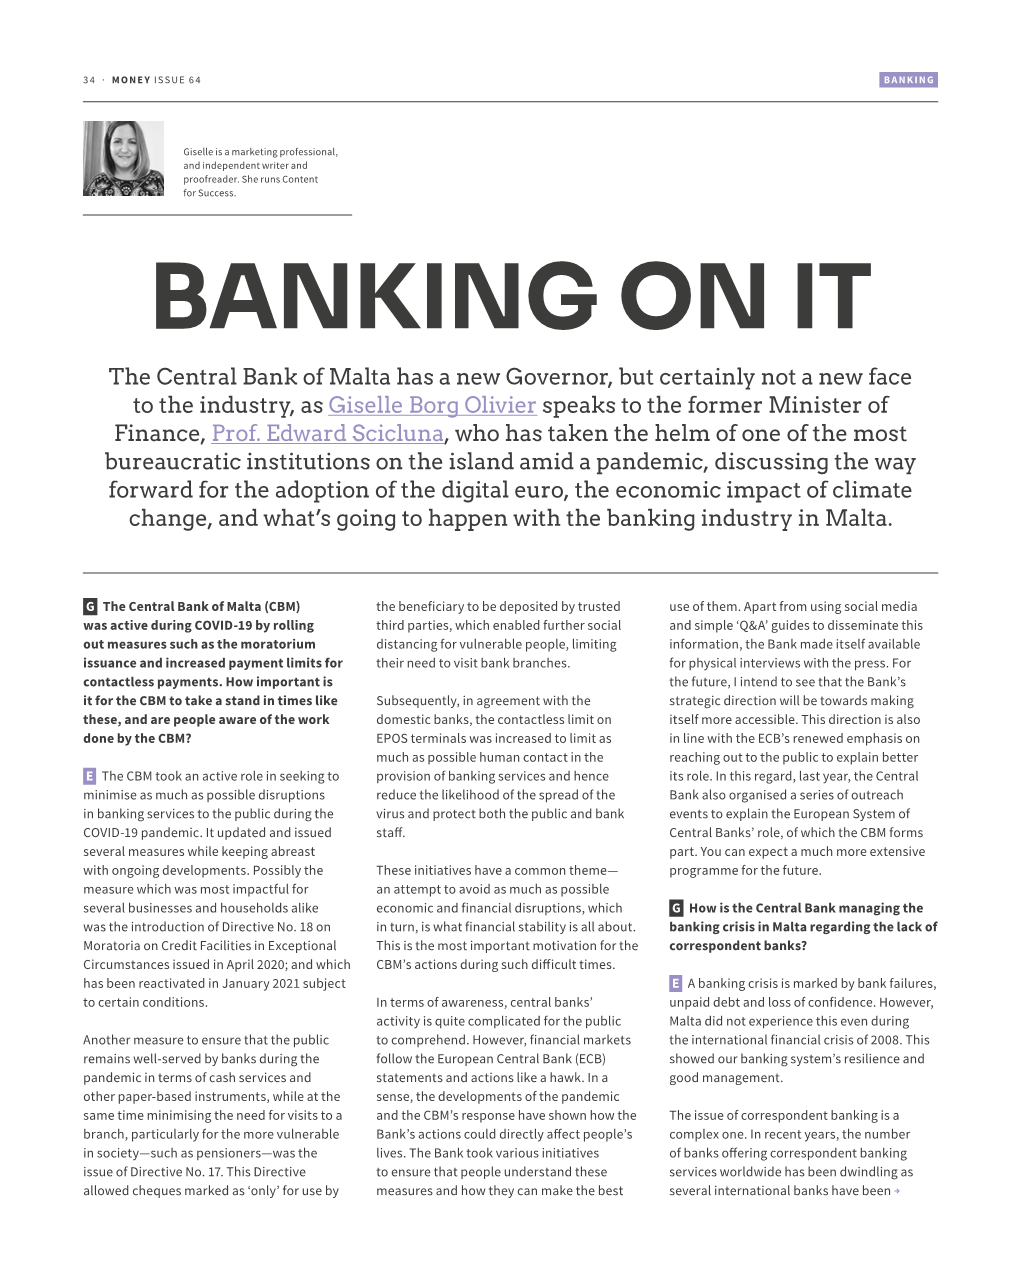 INTERVIEW: Banking on It